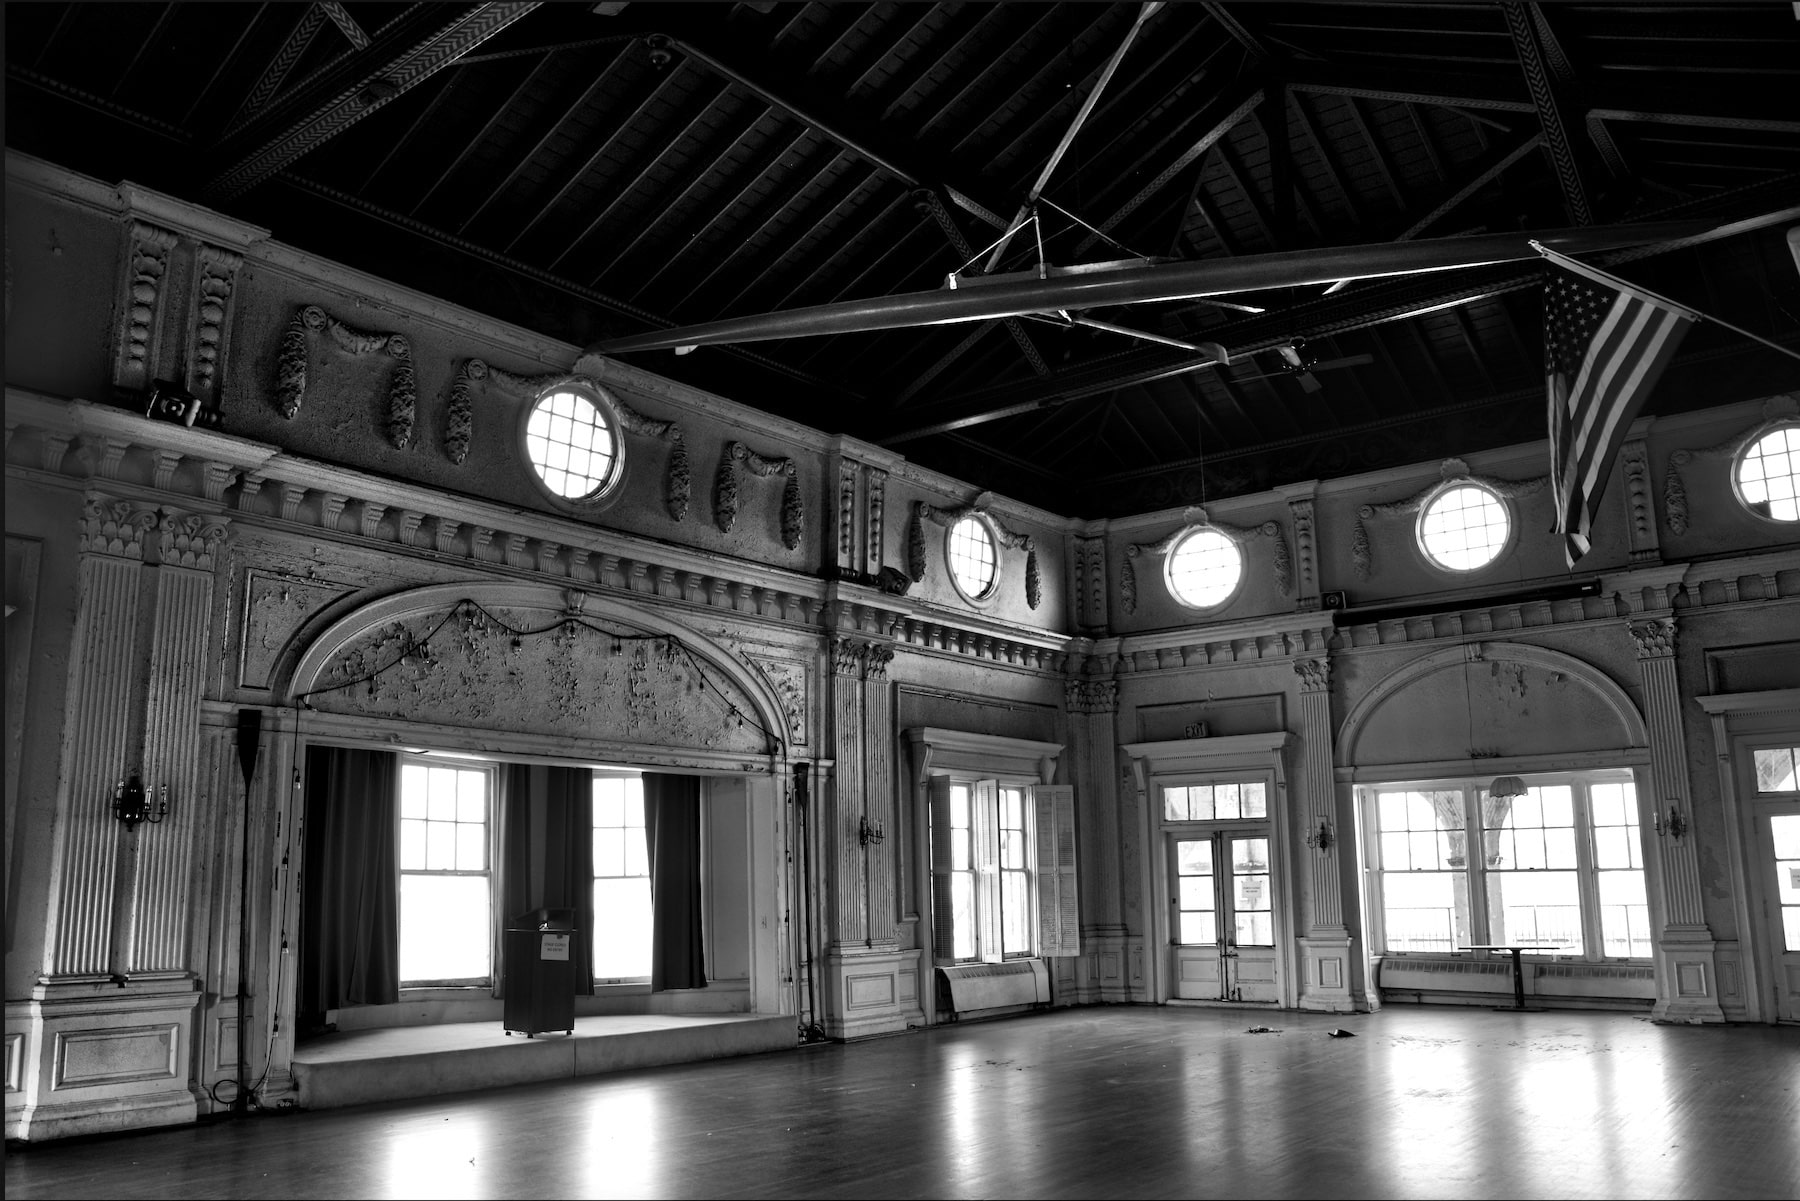 inside the abandoned upper floor ballroom of the Detroit rowing club building